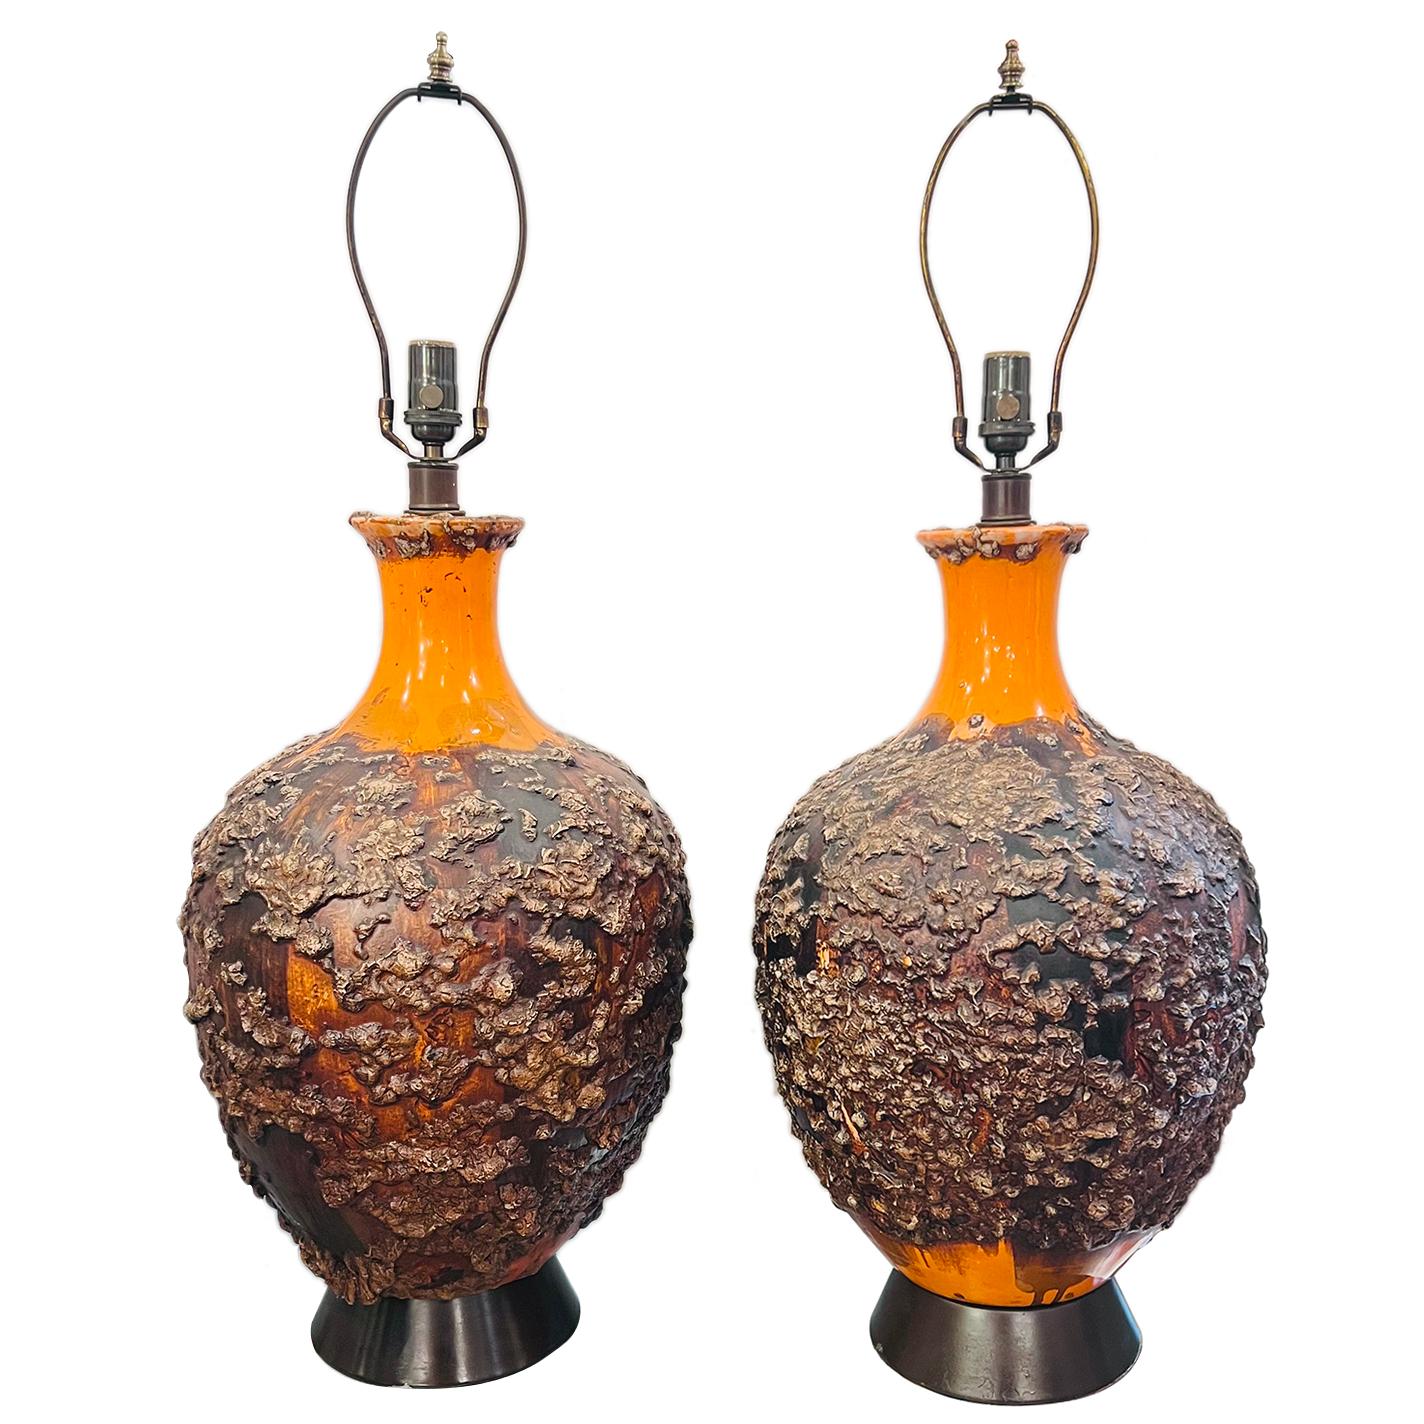 Pair of midcentury Italian porcelain table lamps with glazed finish.

Measurements:
Height of body: 22